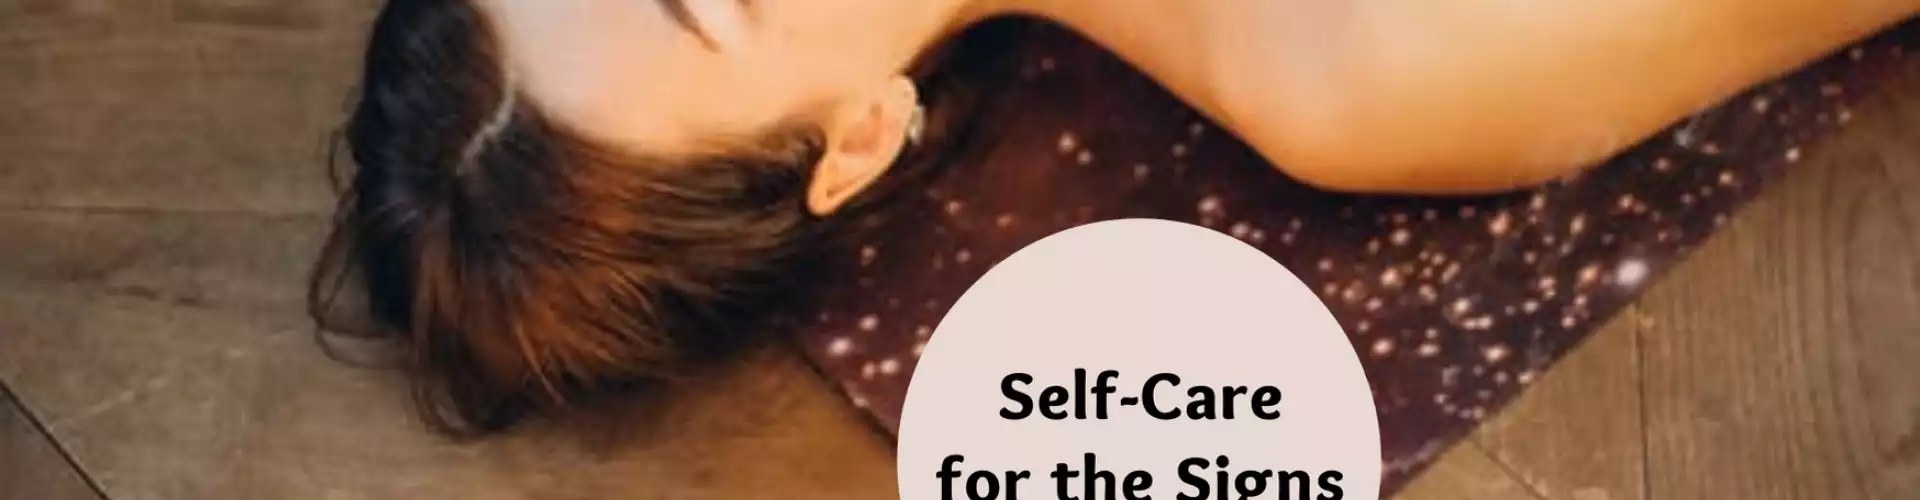 Self-Care for the Signs